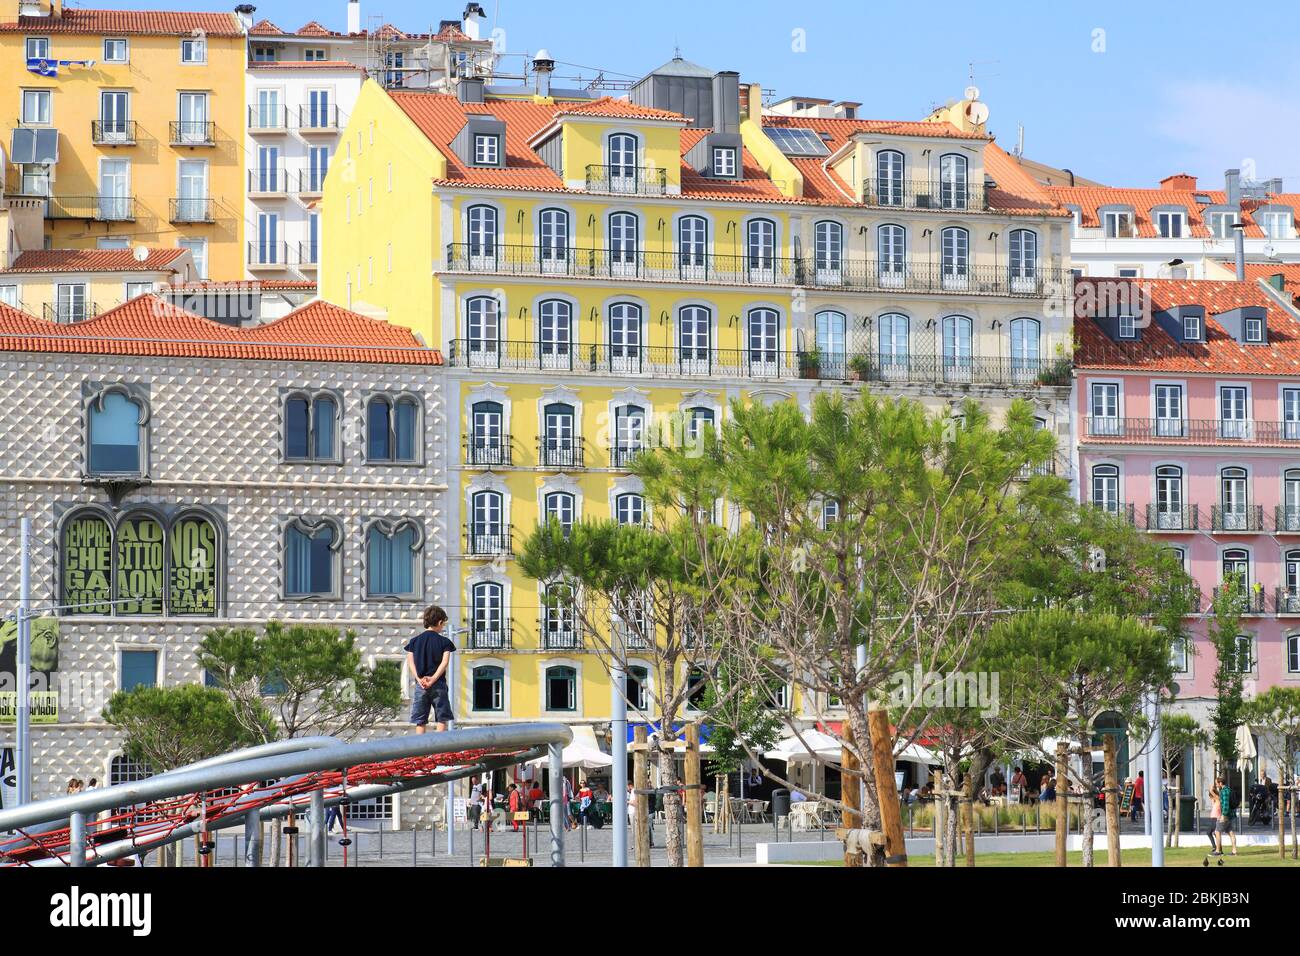 Portugal, Lisbon, Alfama, Casa dos Bicos built in 1523 from Campo das Cebolas, the House of Brás de Albuquerque which houses the José Saramago Foundation is recognizable by its facade covered with cut stones in the shape of a diamond point Stock Photo